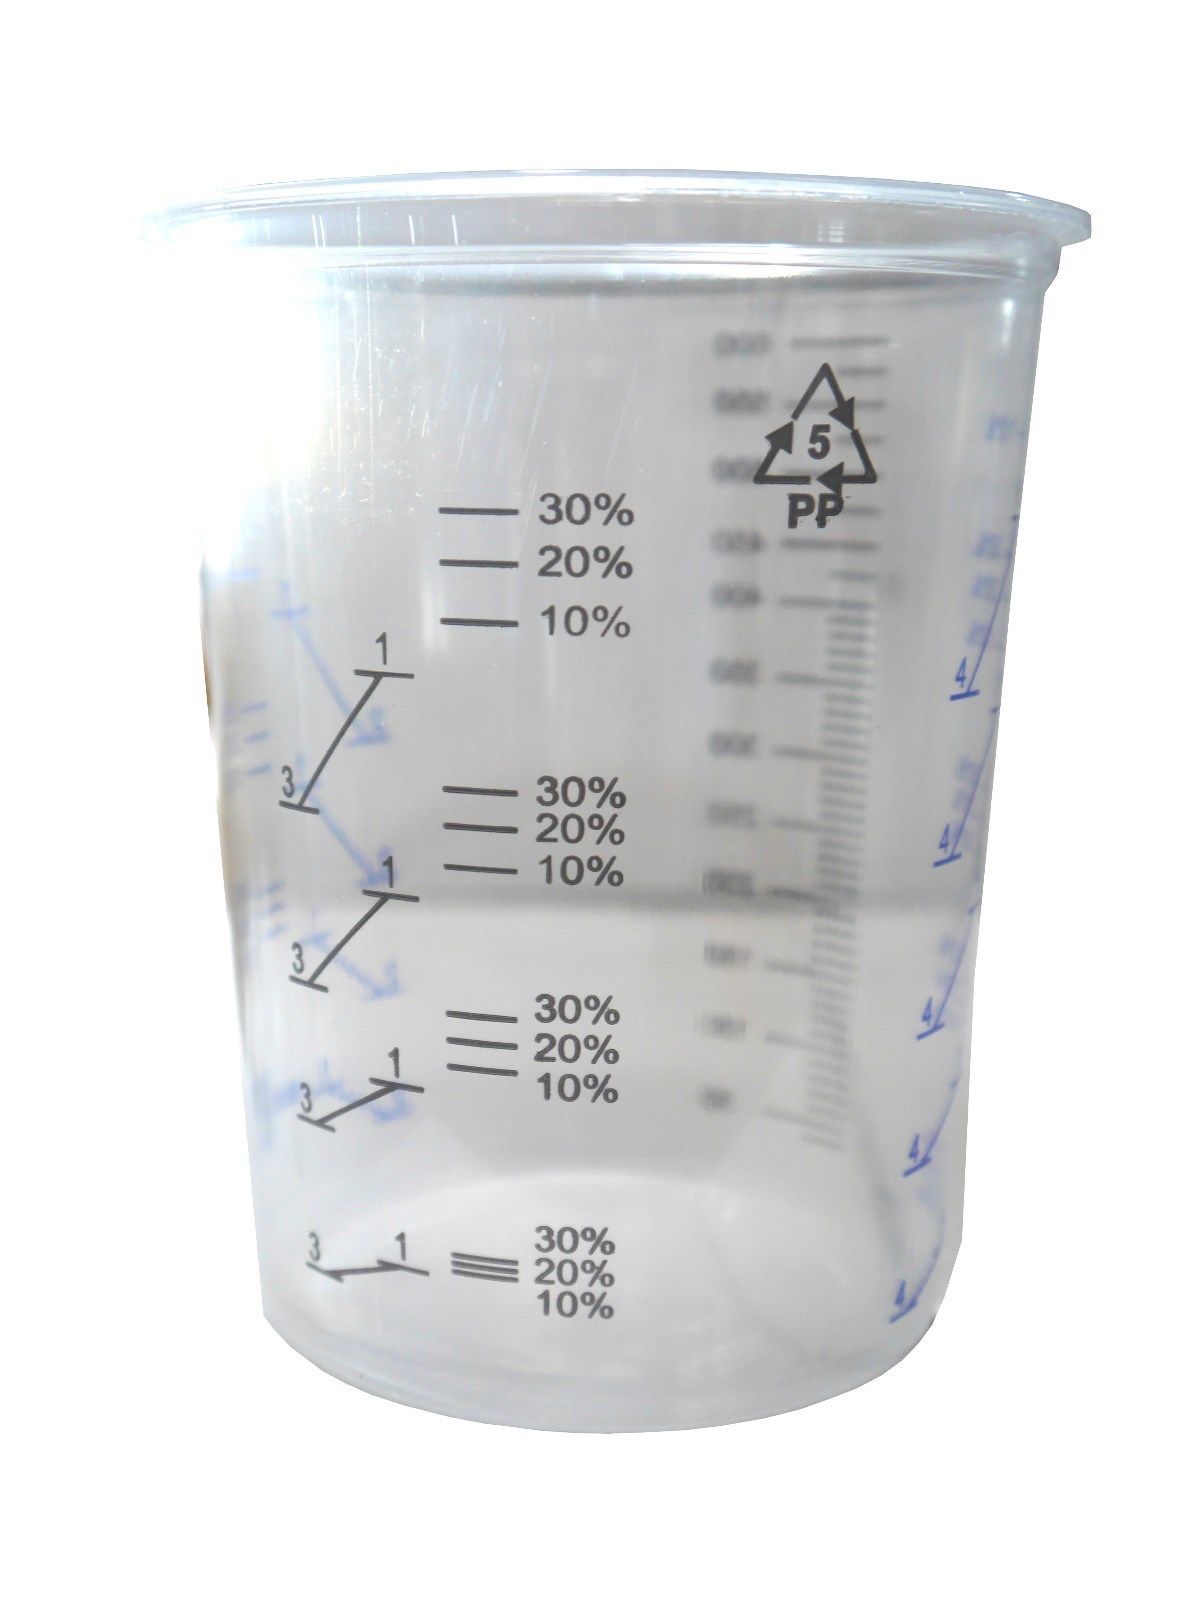 PLASTIC PAINT MIXING CUPS 100 X CUPS 600ML CALIBRATED - SPRAY ...